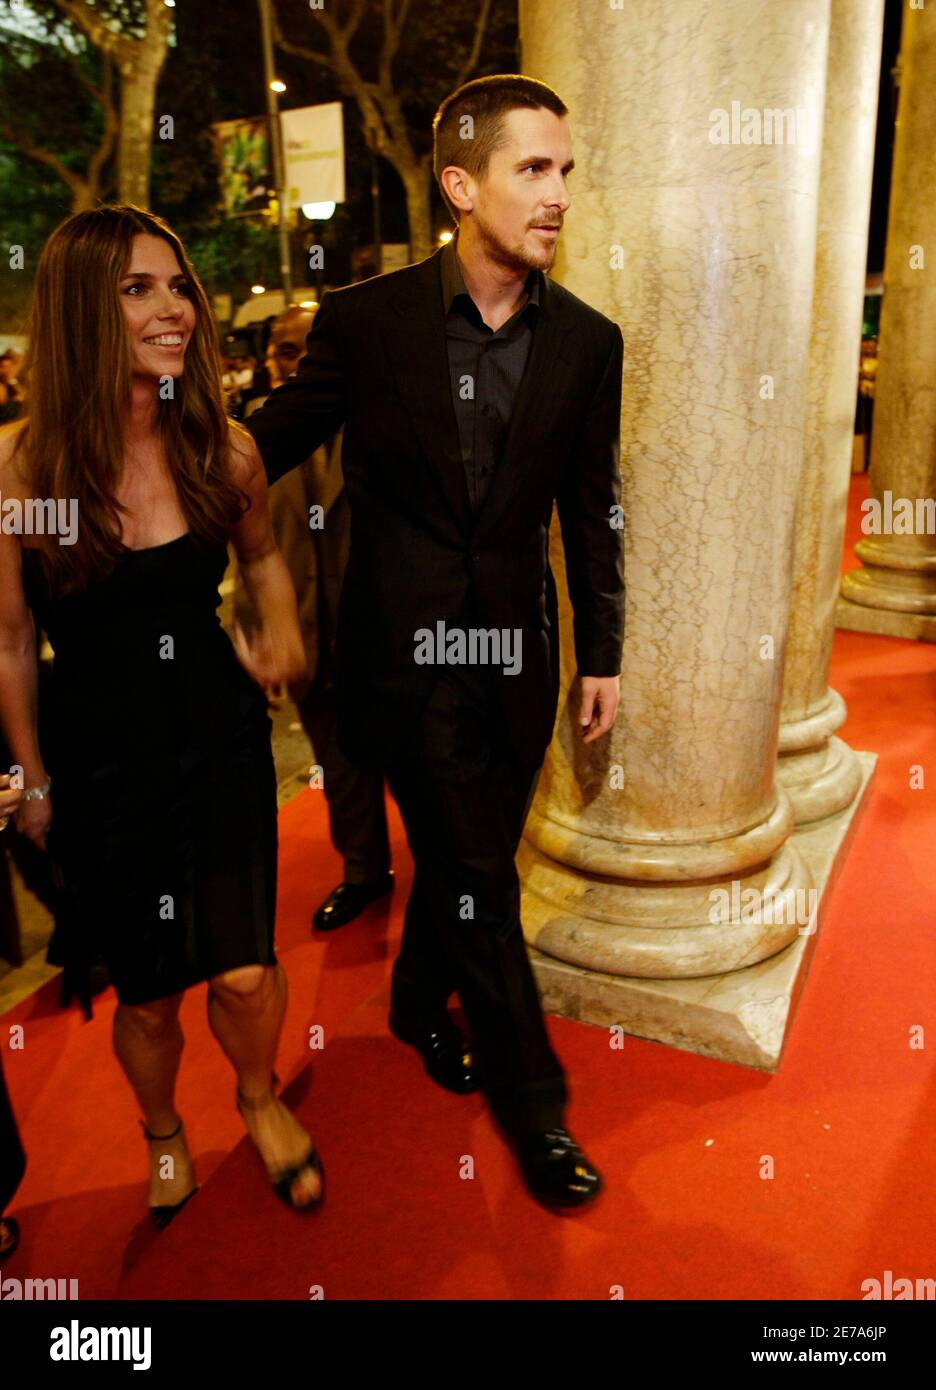 British actor Christian Bale and his wife Sandra ?Sibi? Blazic arrive at a  photocall for the movie 